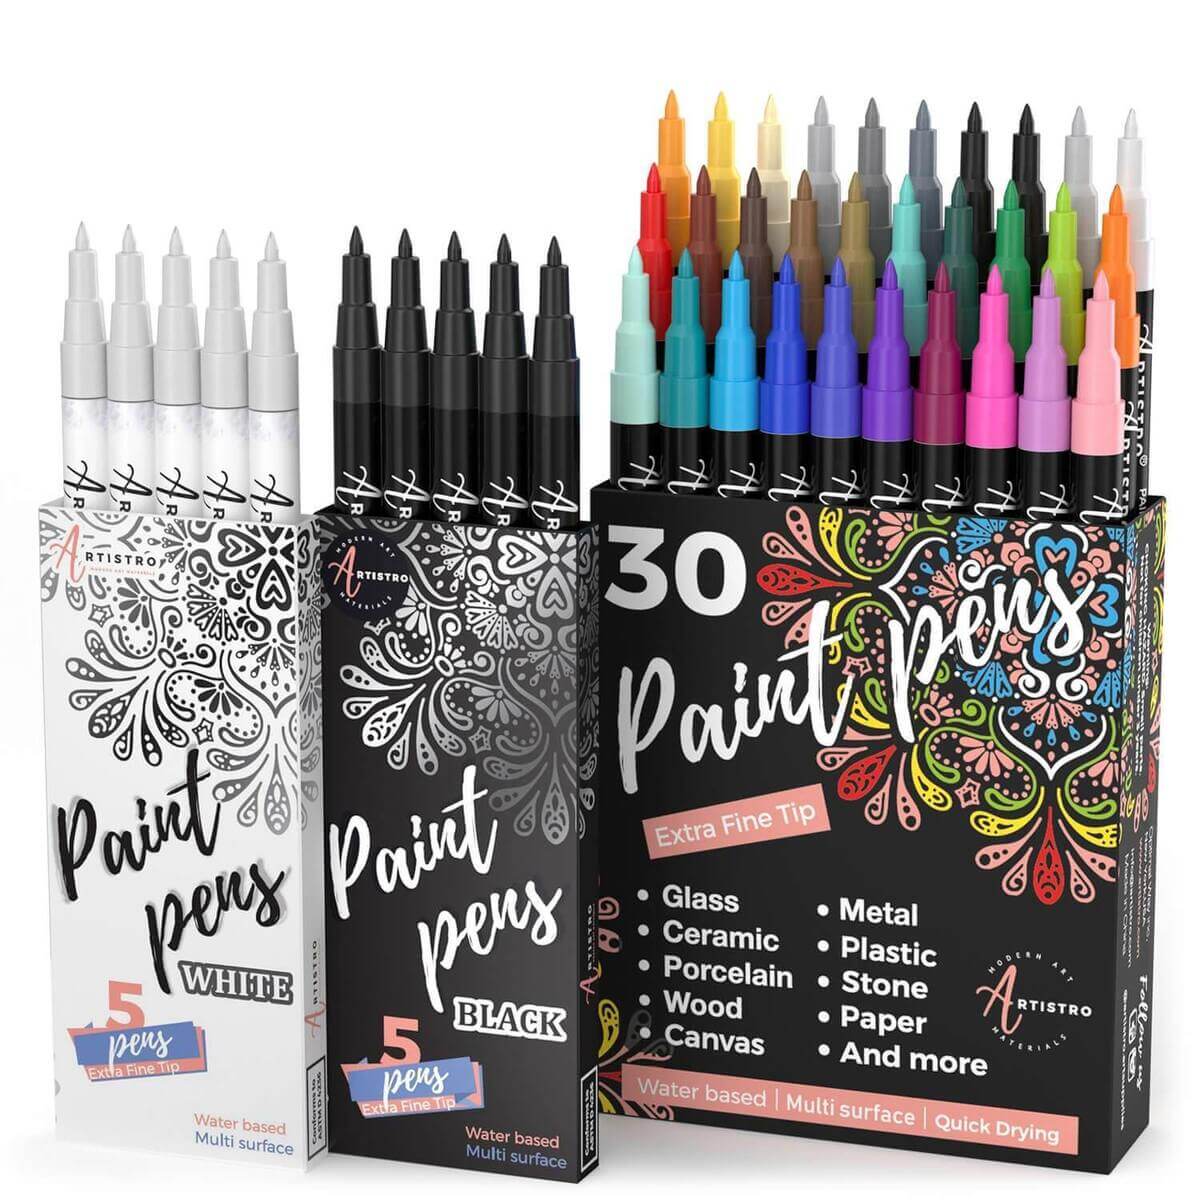 http://artistro.com/cdn/shop/products/40-acrylic-markers-extra-fine-tip-30-multicolor-paint-pens-5-white-markers-5-black-paint-pens-for-rock-wood-glass-ceramic-painting-589023.jpg?v=1639151085